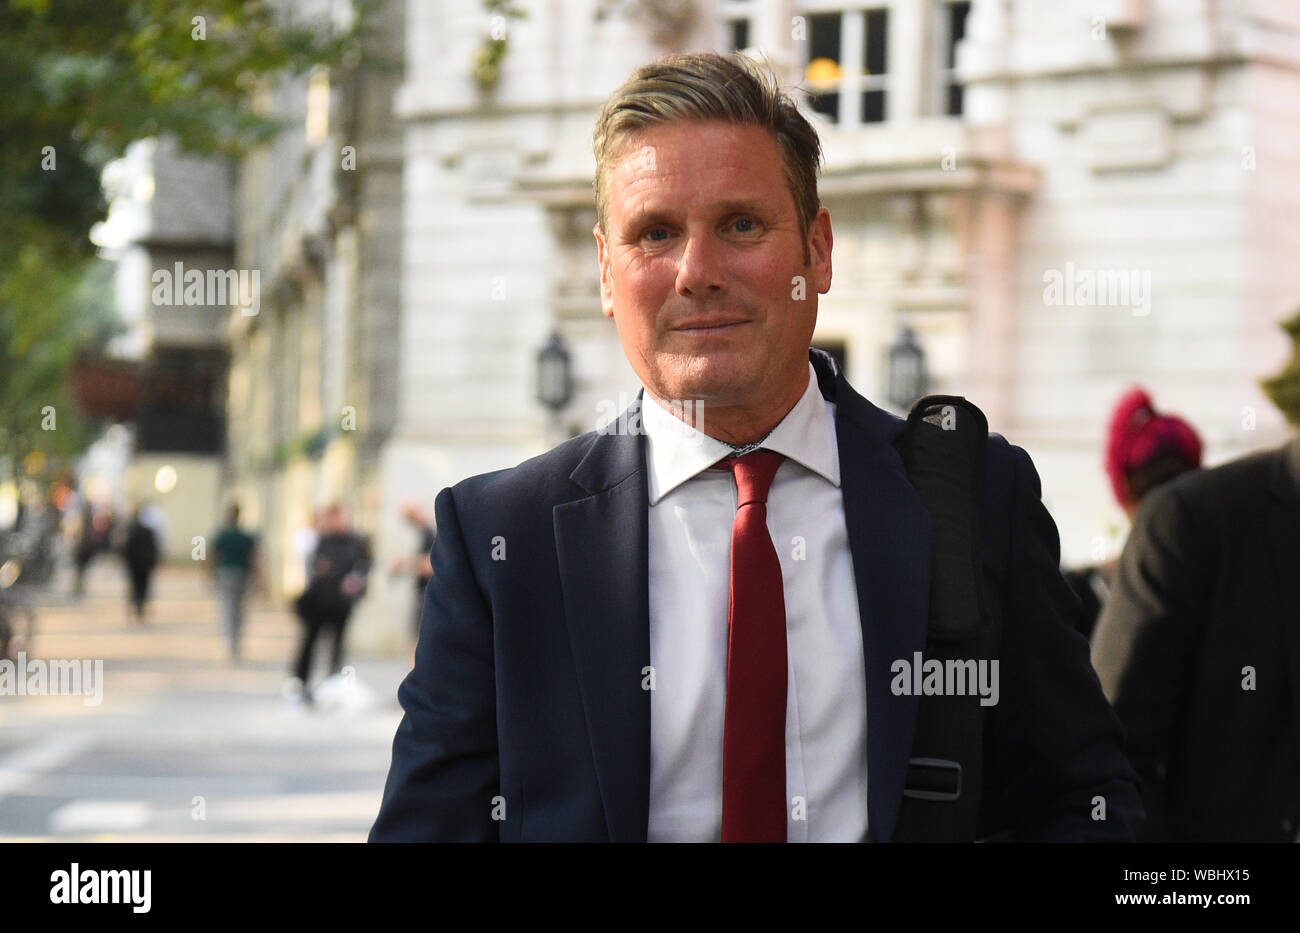 Keir Starmer, Shadow Secretary of State for Exiting the European Union leaving Millbank, ahead of today's cross party meeting looking at ways to stop a no deal Brexit. Stock Photo